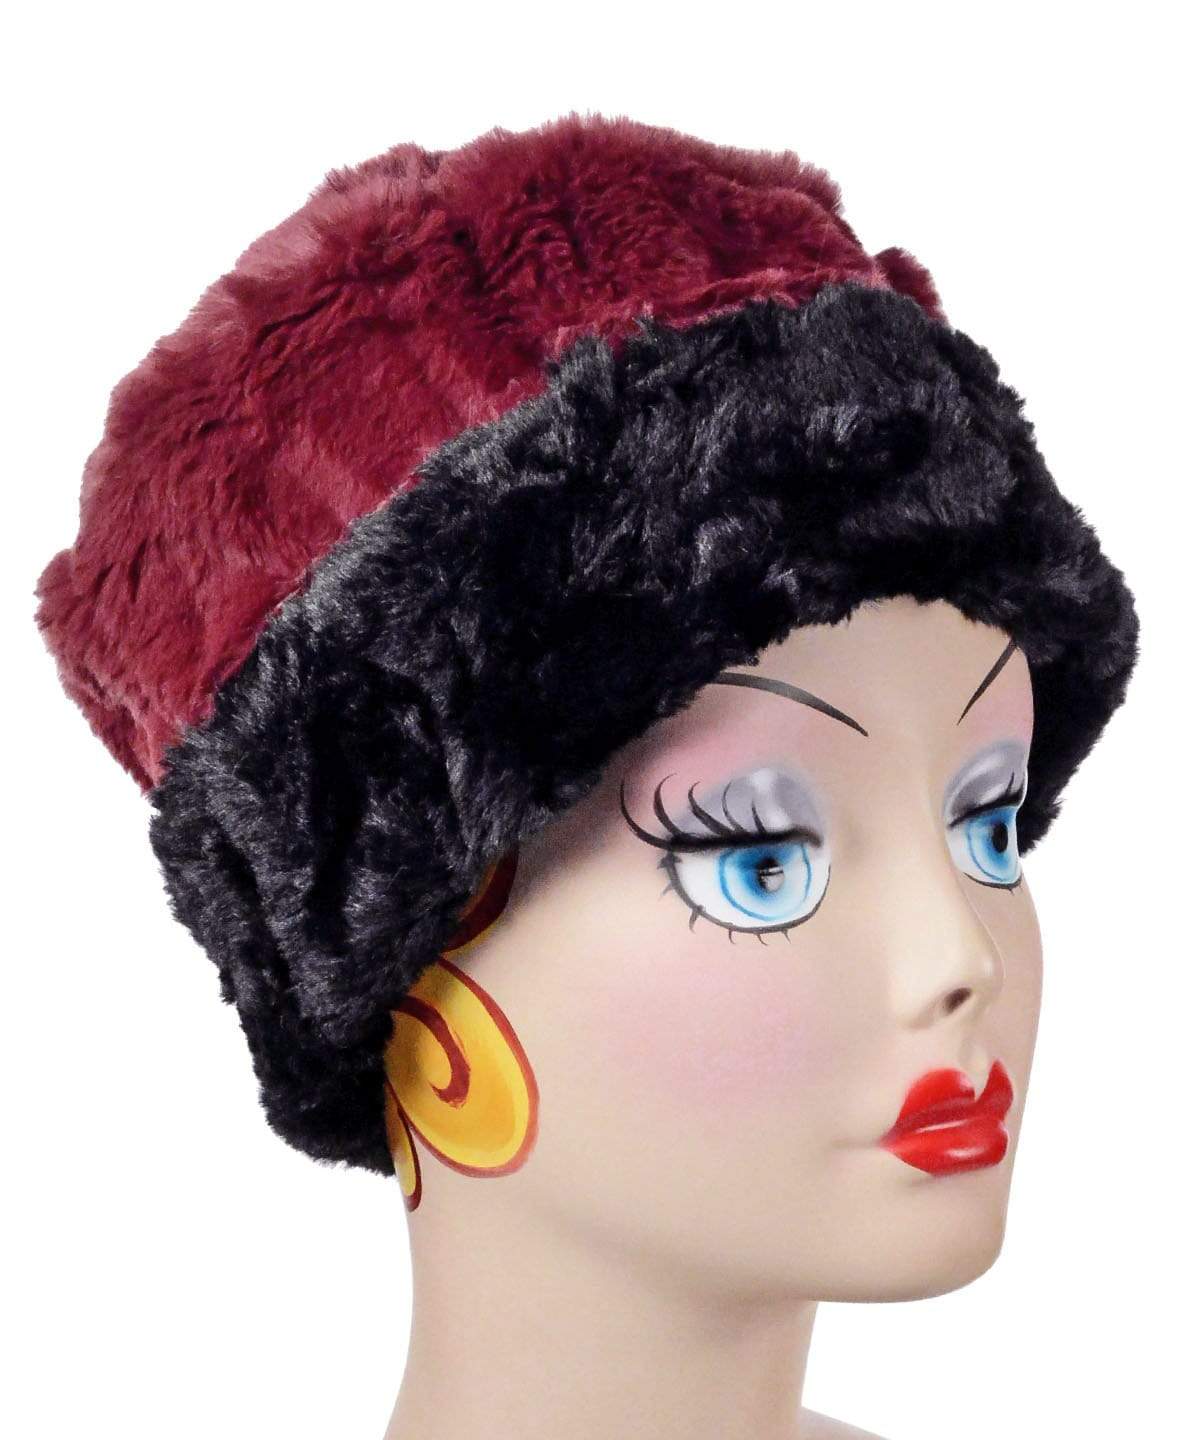   Women&#39;s Cuffed Pillbox on mannequin | Cranberry Creek Faux Fur  with Cuddly Black| Handmade USA by Pandemonium Seattle